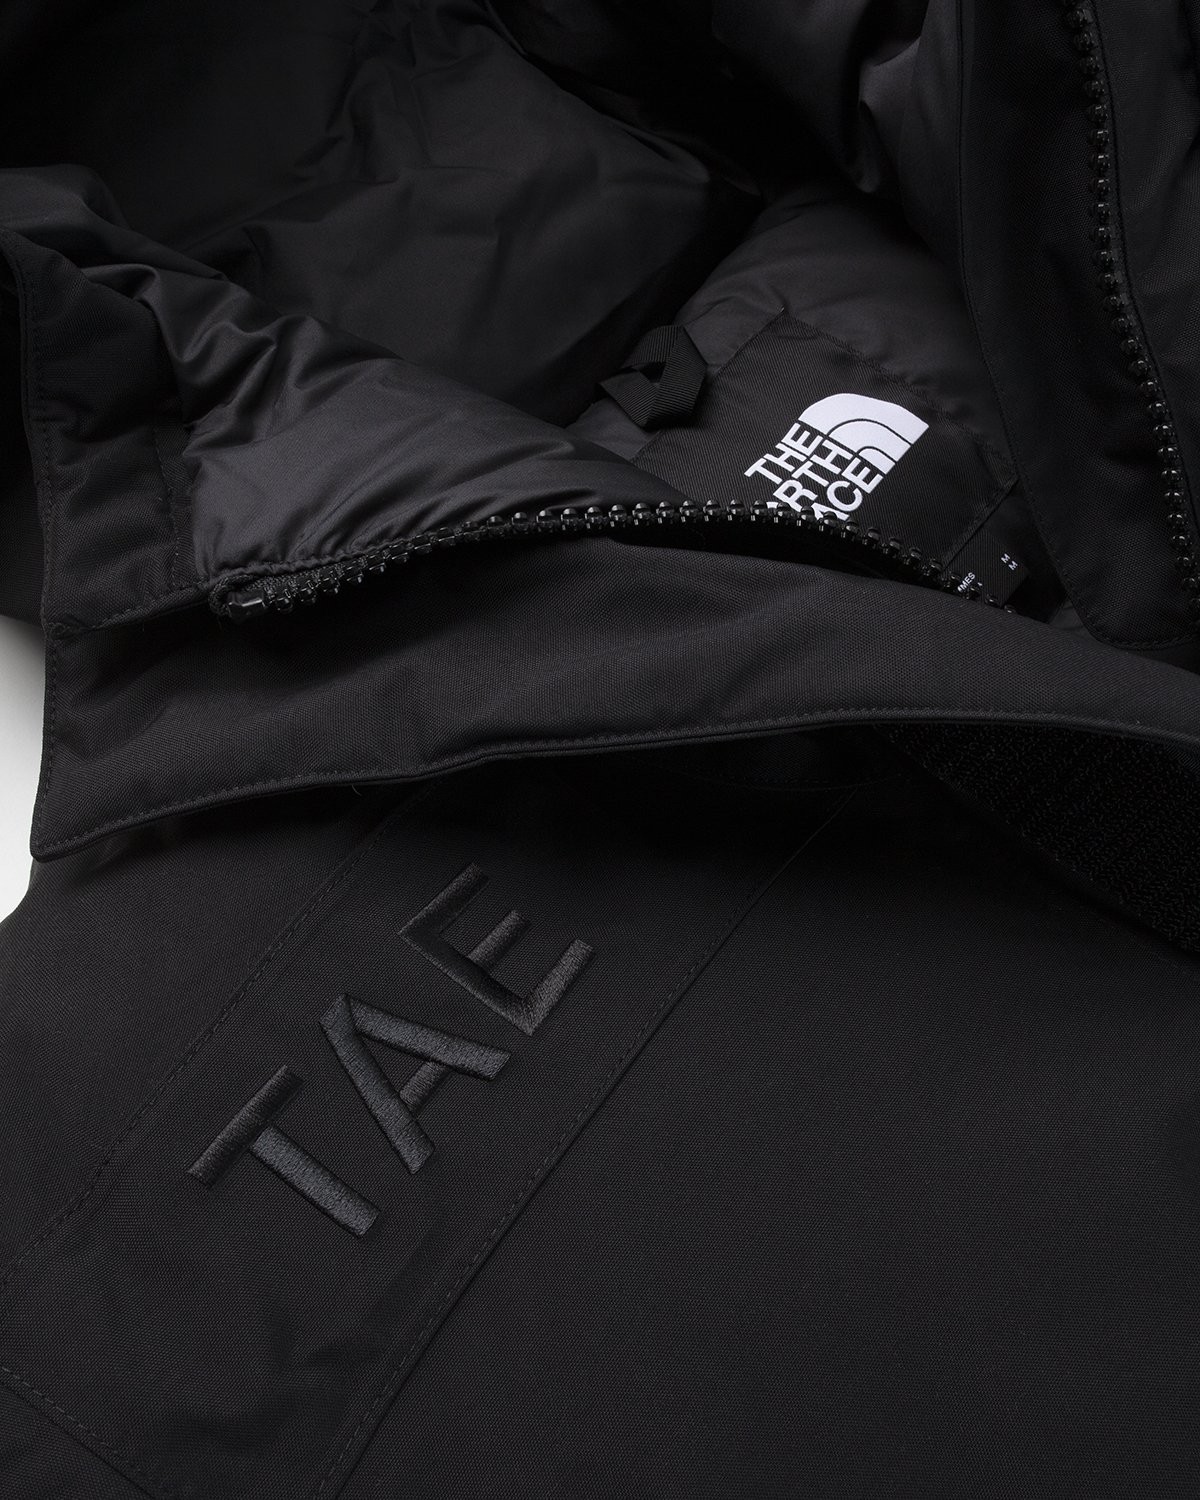 The North Face – Trans Antarctica Expedition Parka Black | Highsnobiety ...